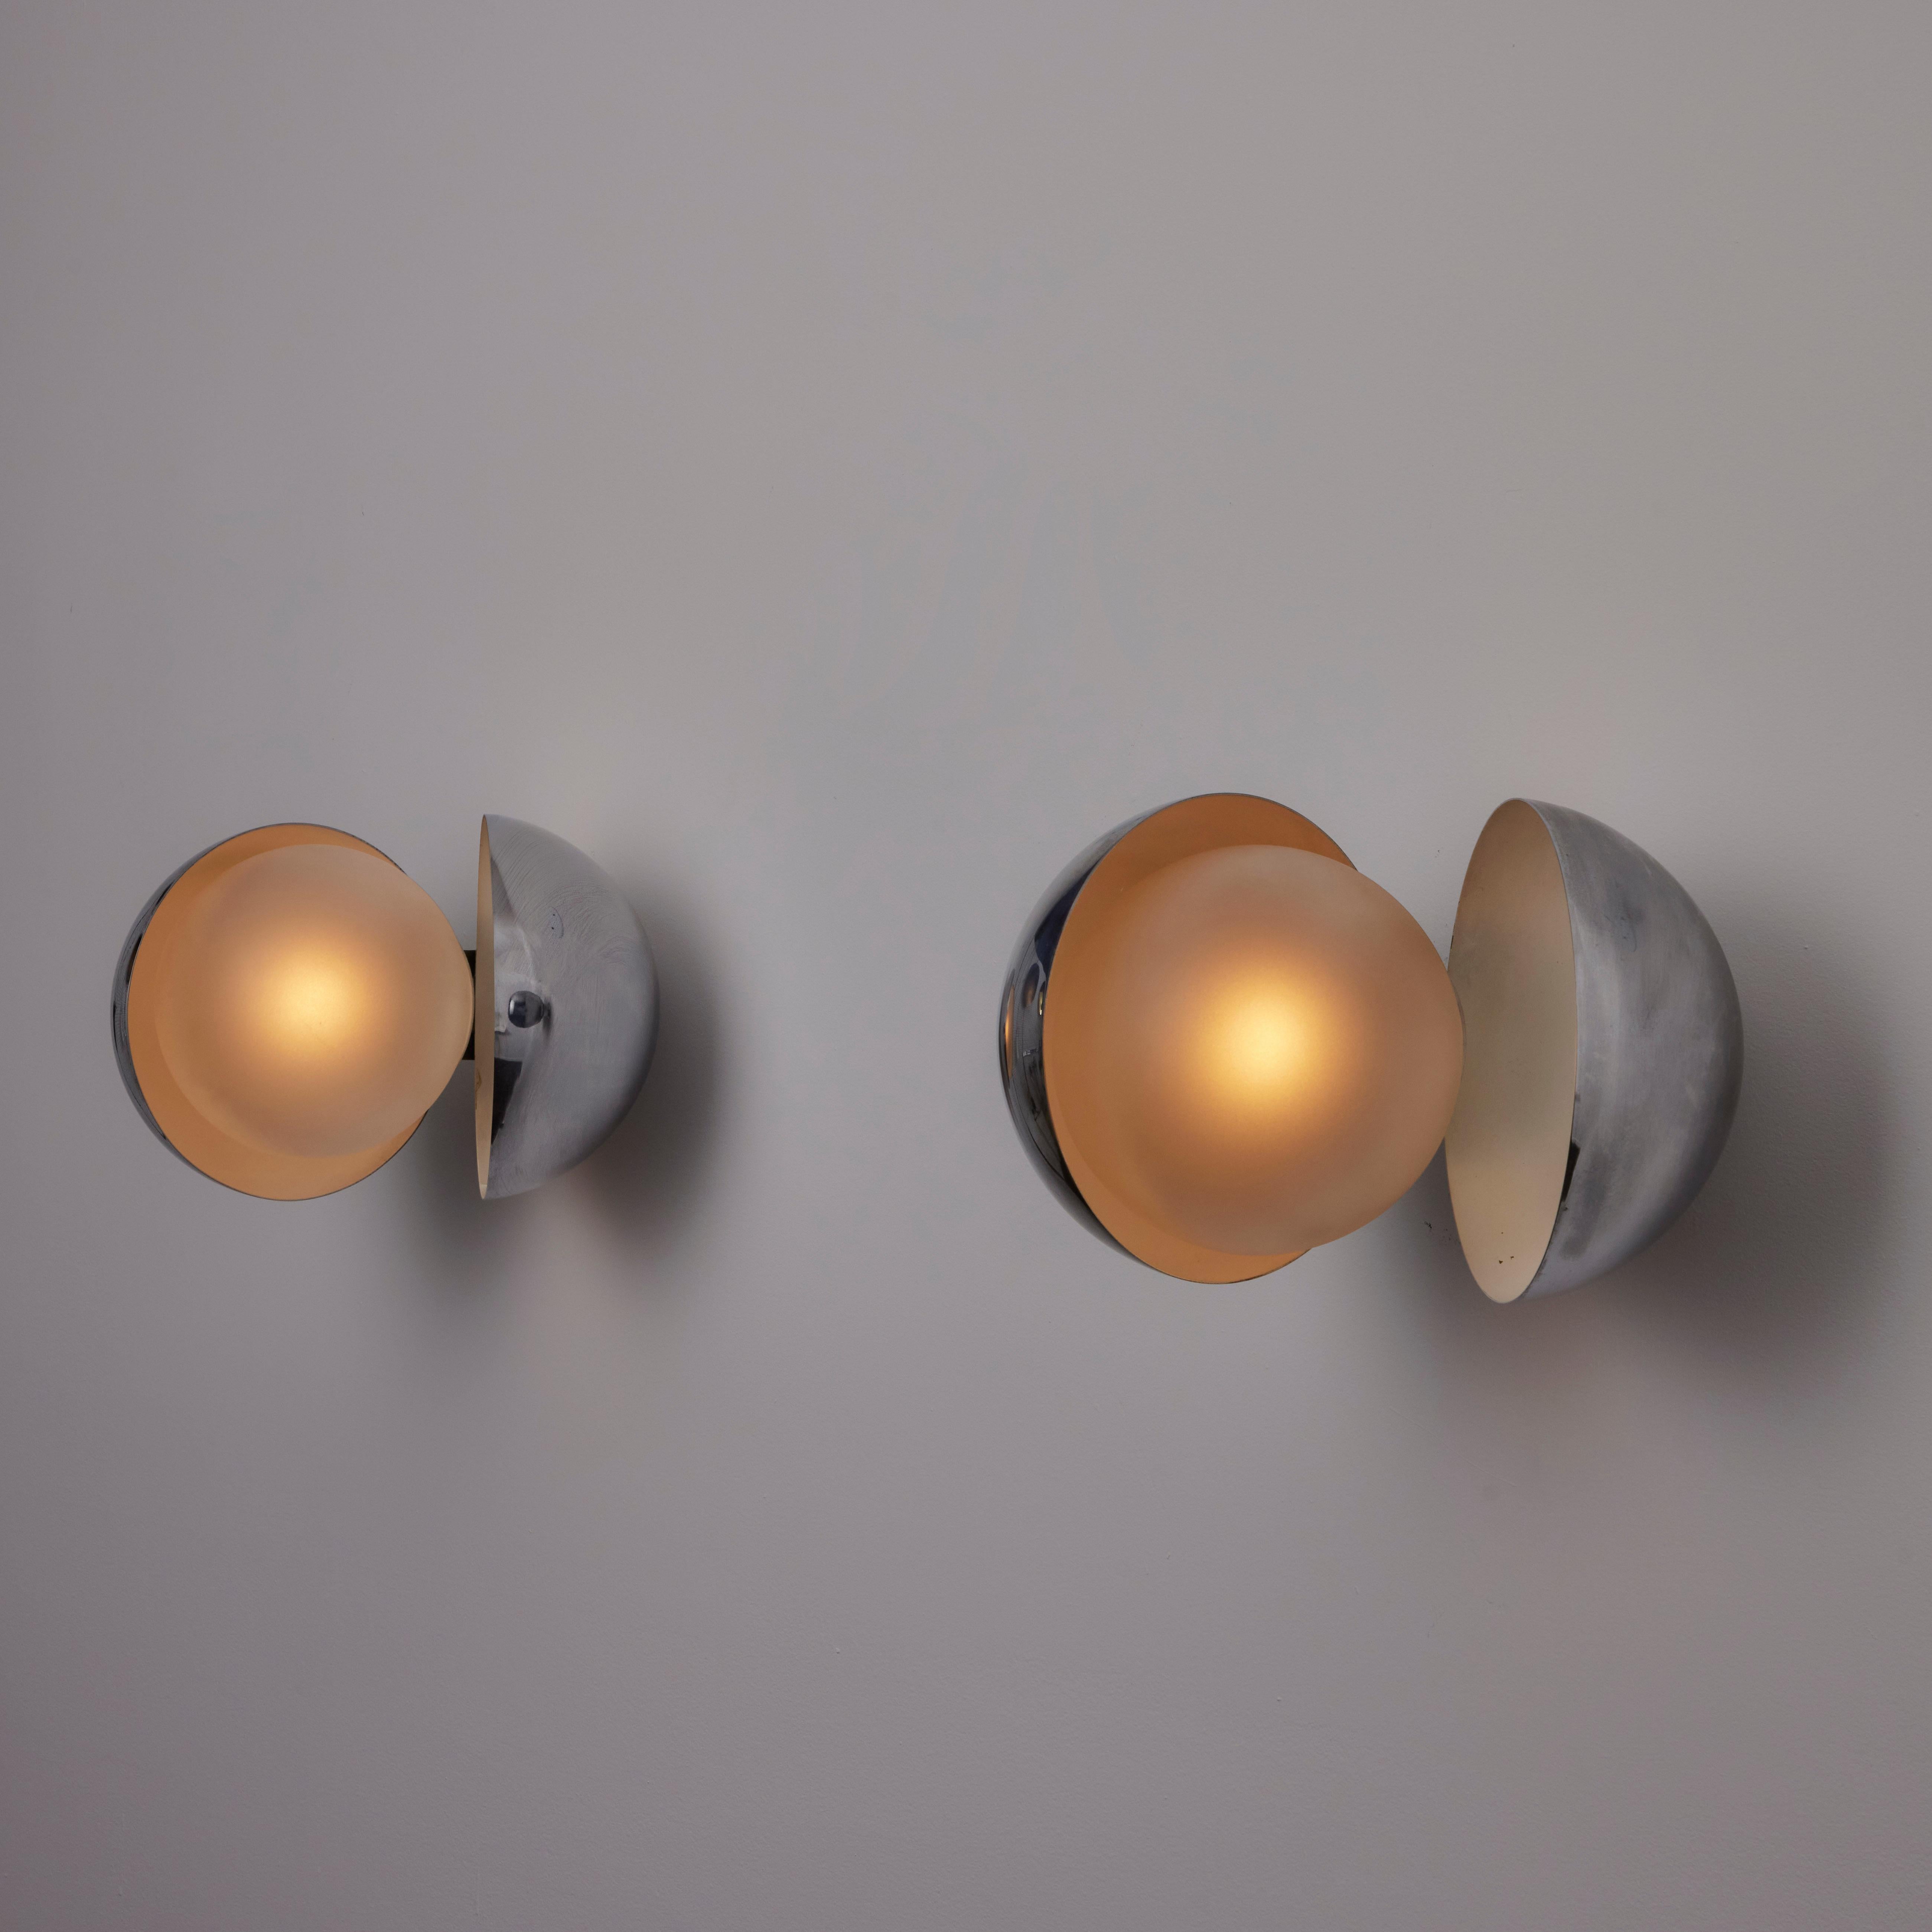 Rare pair of Diaframma Sconces by: G. Piero & A. Monti for Fontana Arte. Designed and manufactured in Italy, circa 1960's. Butterfly sconces consisting of a chrome outer shell and clear etched glass globes. You are able to open and close the outer